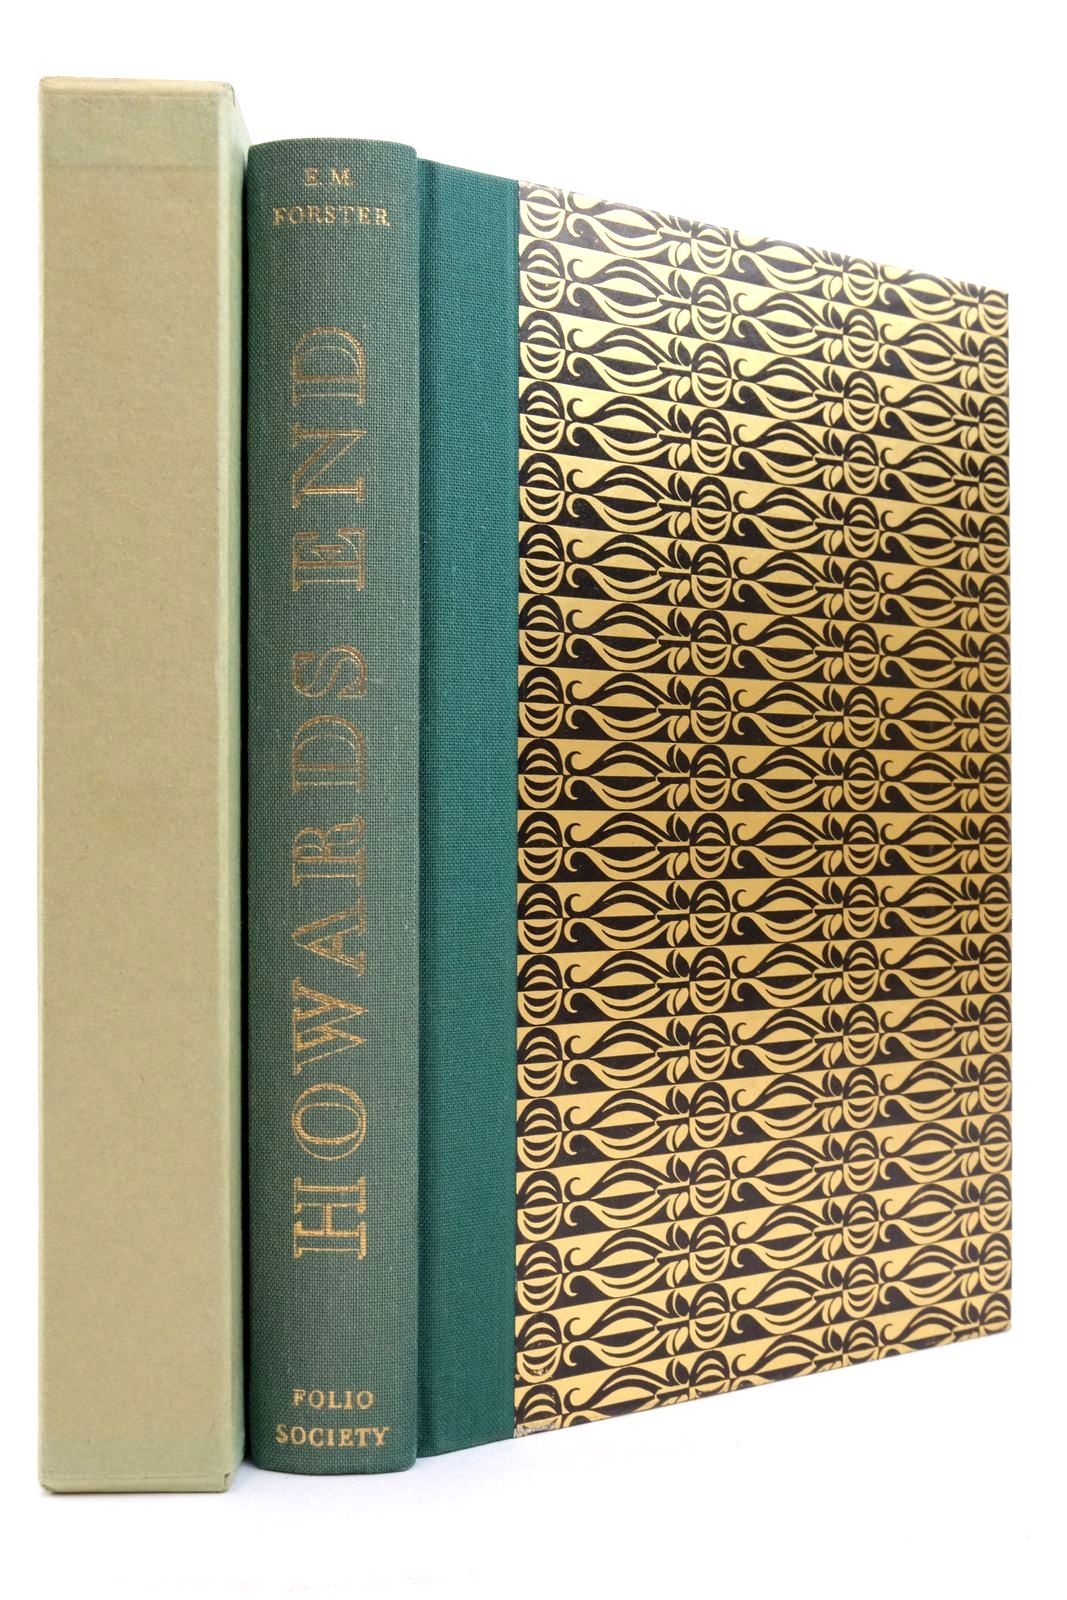 Photo of HOWARDS END written by Forster, E.M. illustrated by Campbell, Jennifer published by Folio Society (STOCK CODE: 2138191)  for sale by Stella & Rose's Books